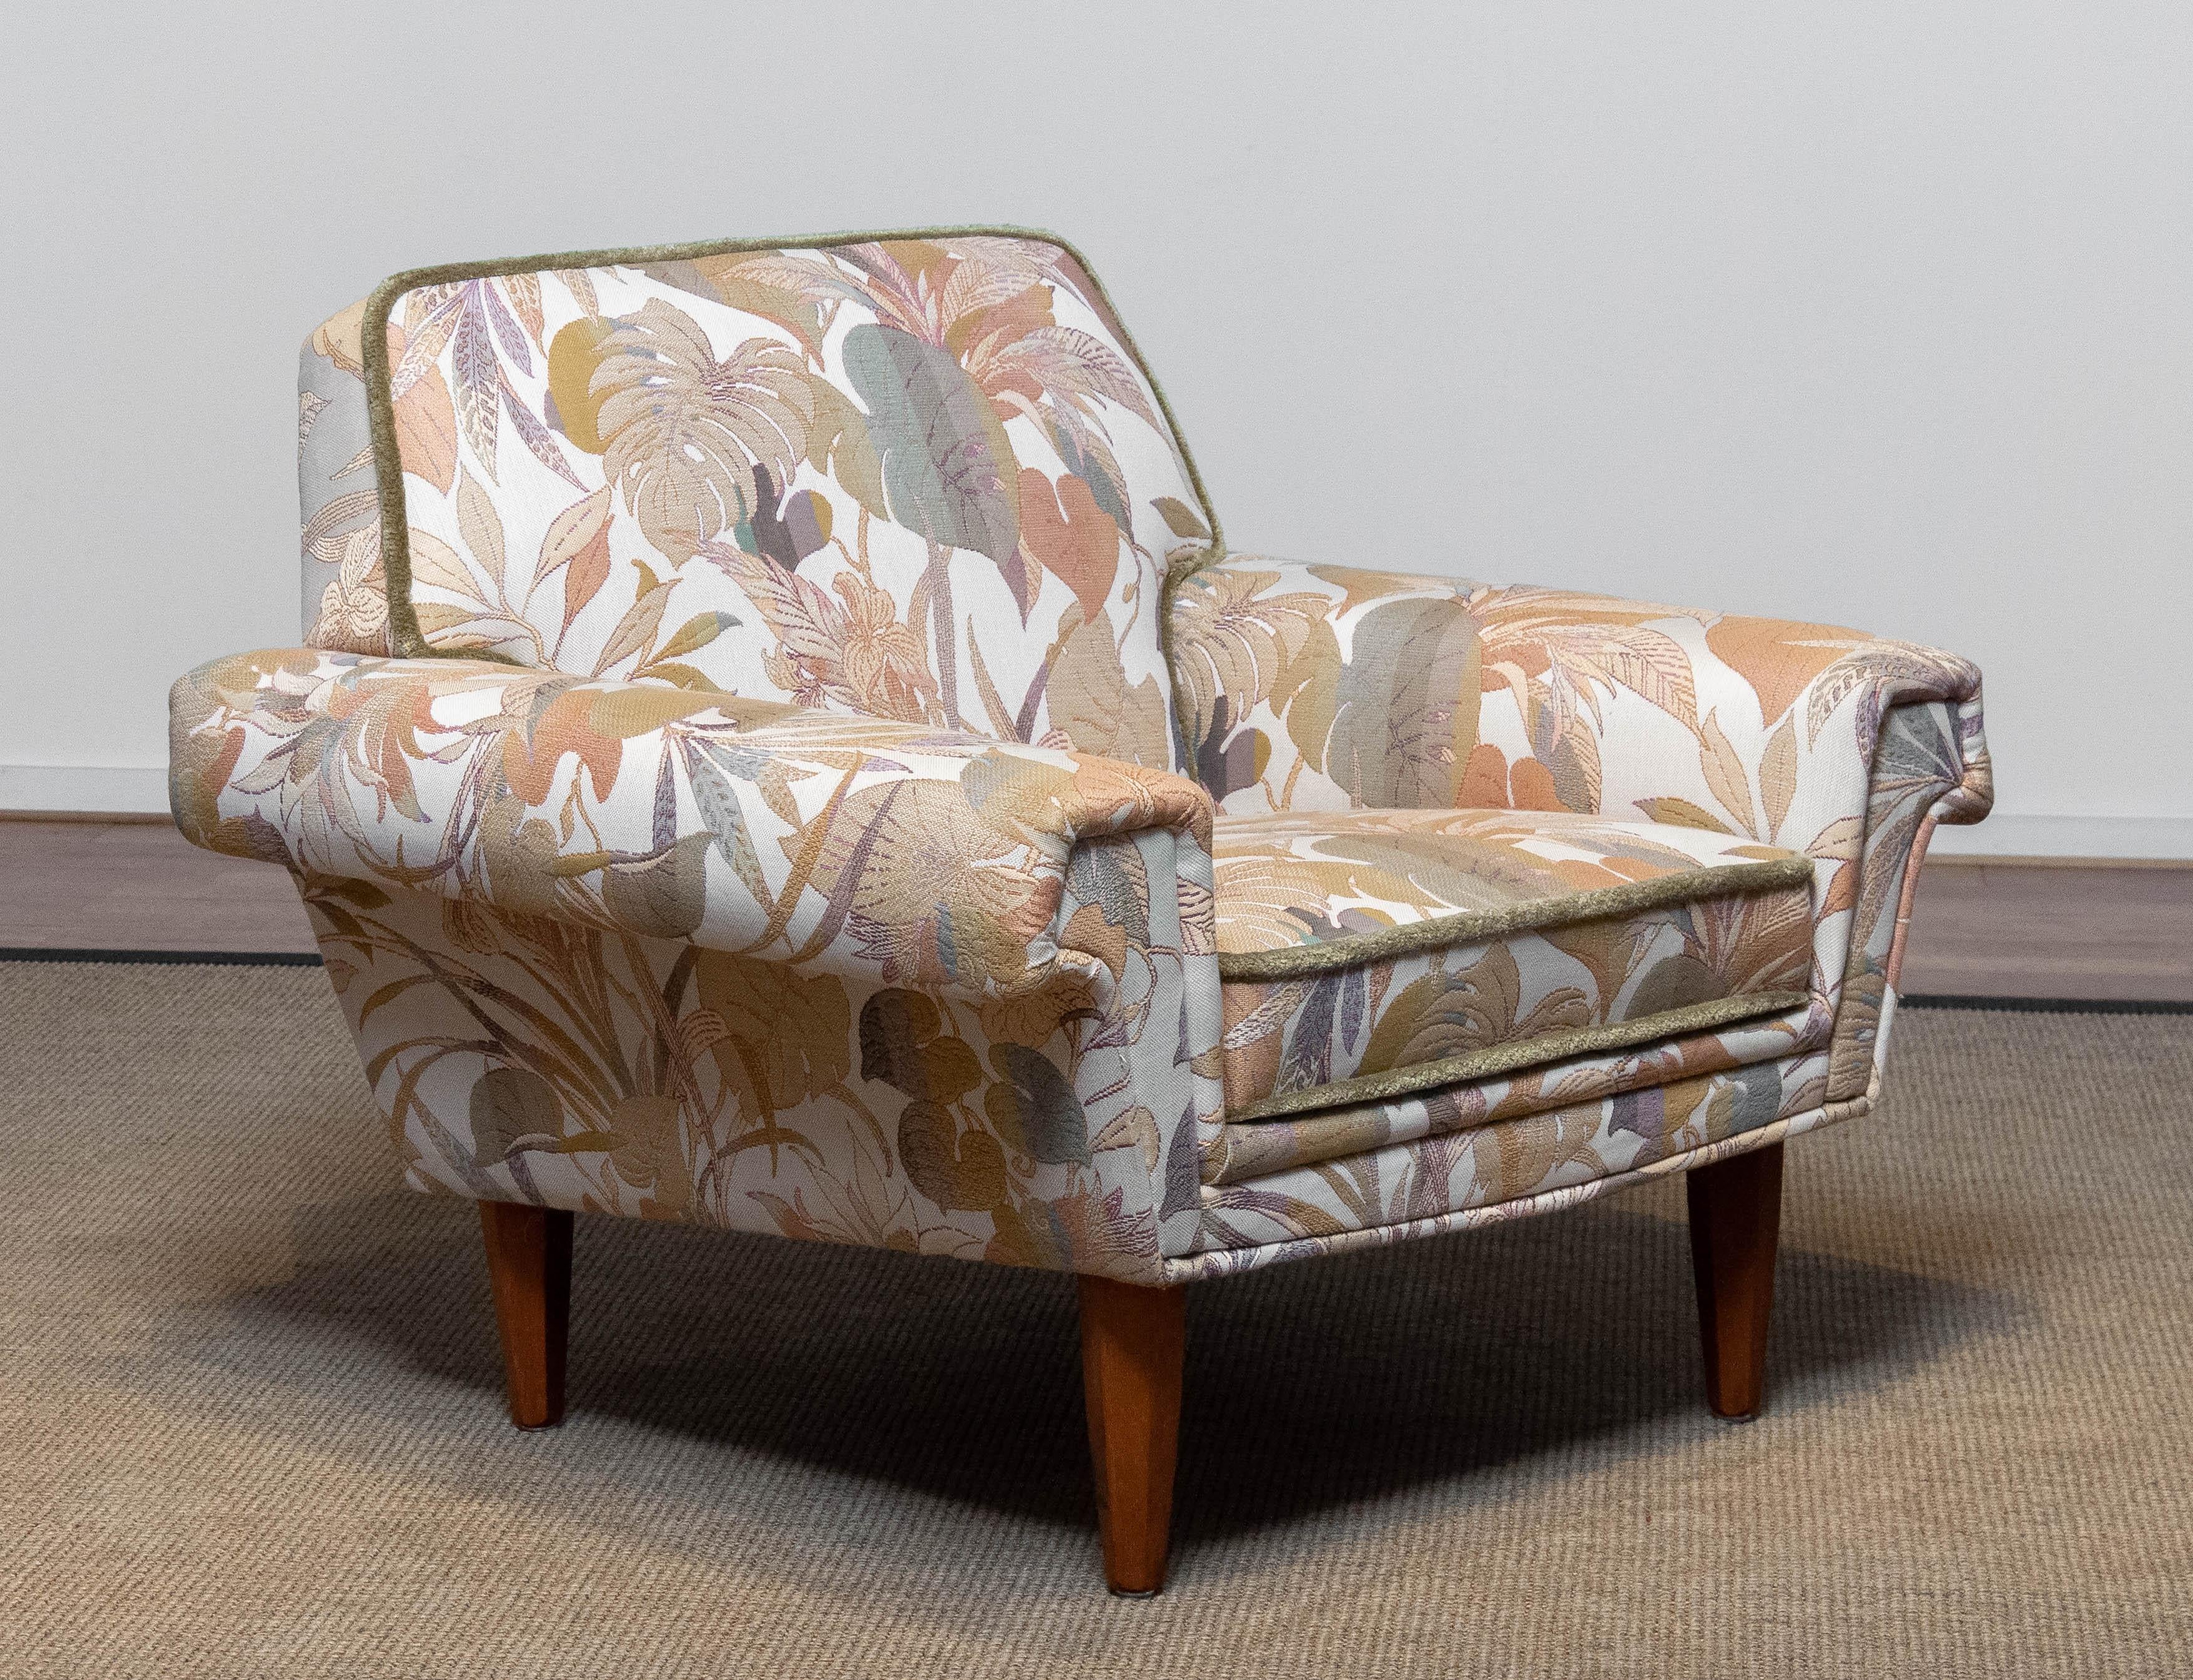 Danish Low Back Lounge Chair Upholstered Floral Jacquard Fabric from the 1970's For Sale 2